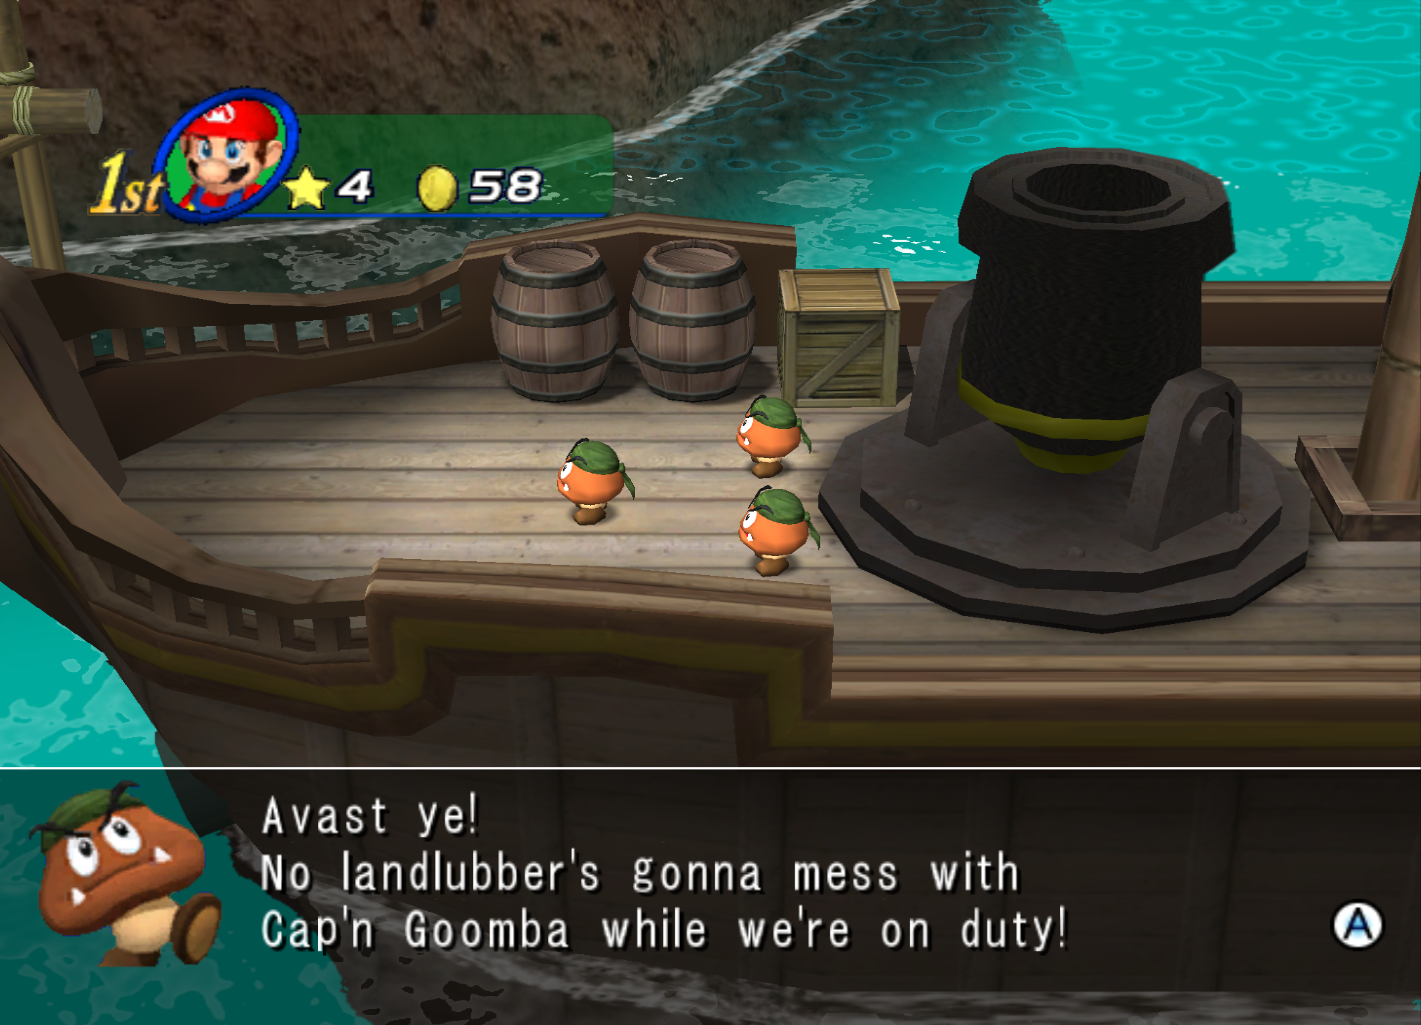 Pirate_Goomba%27s_Minions.png